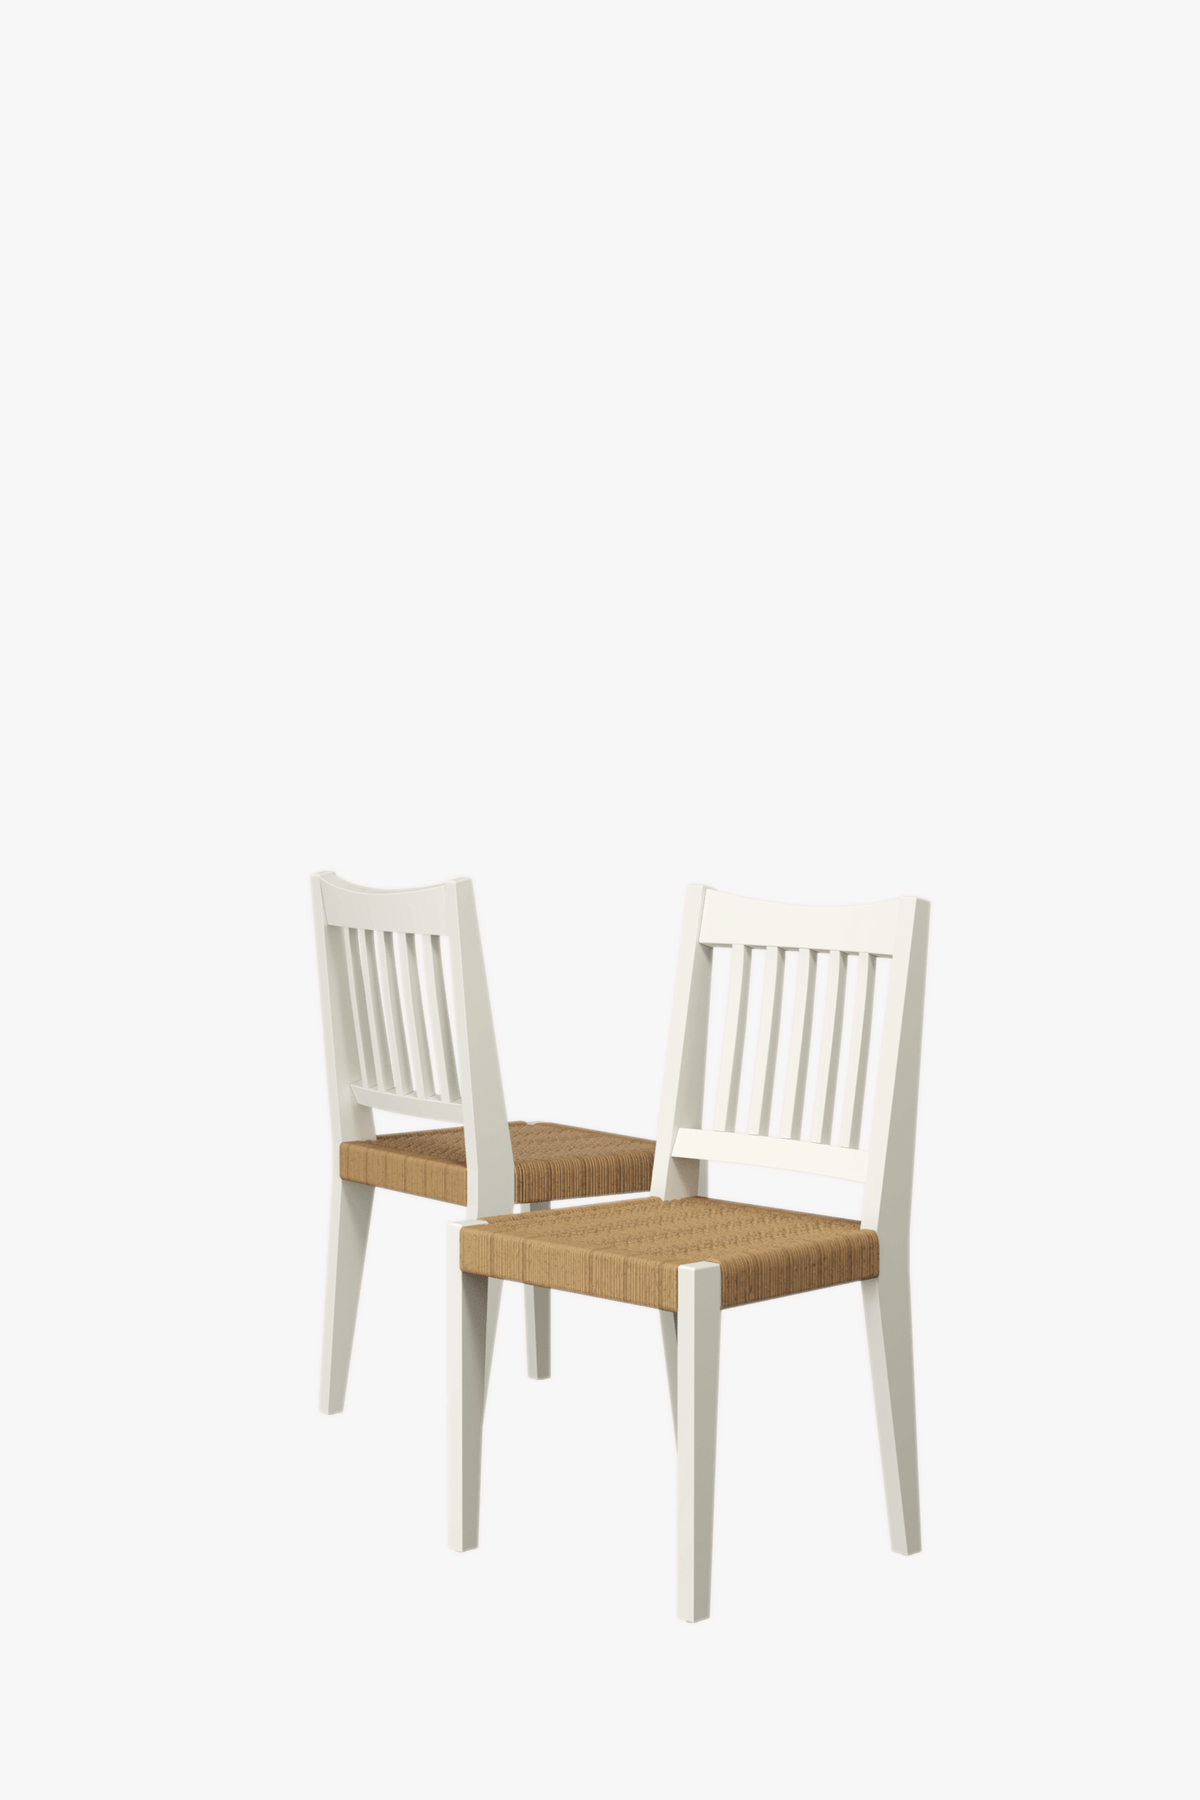 Llanbister Pair of Dining Chairs